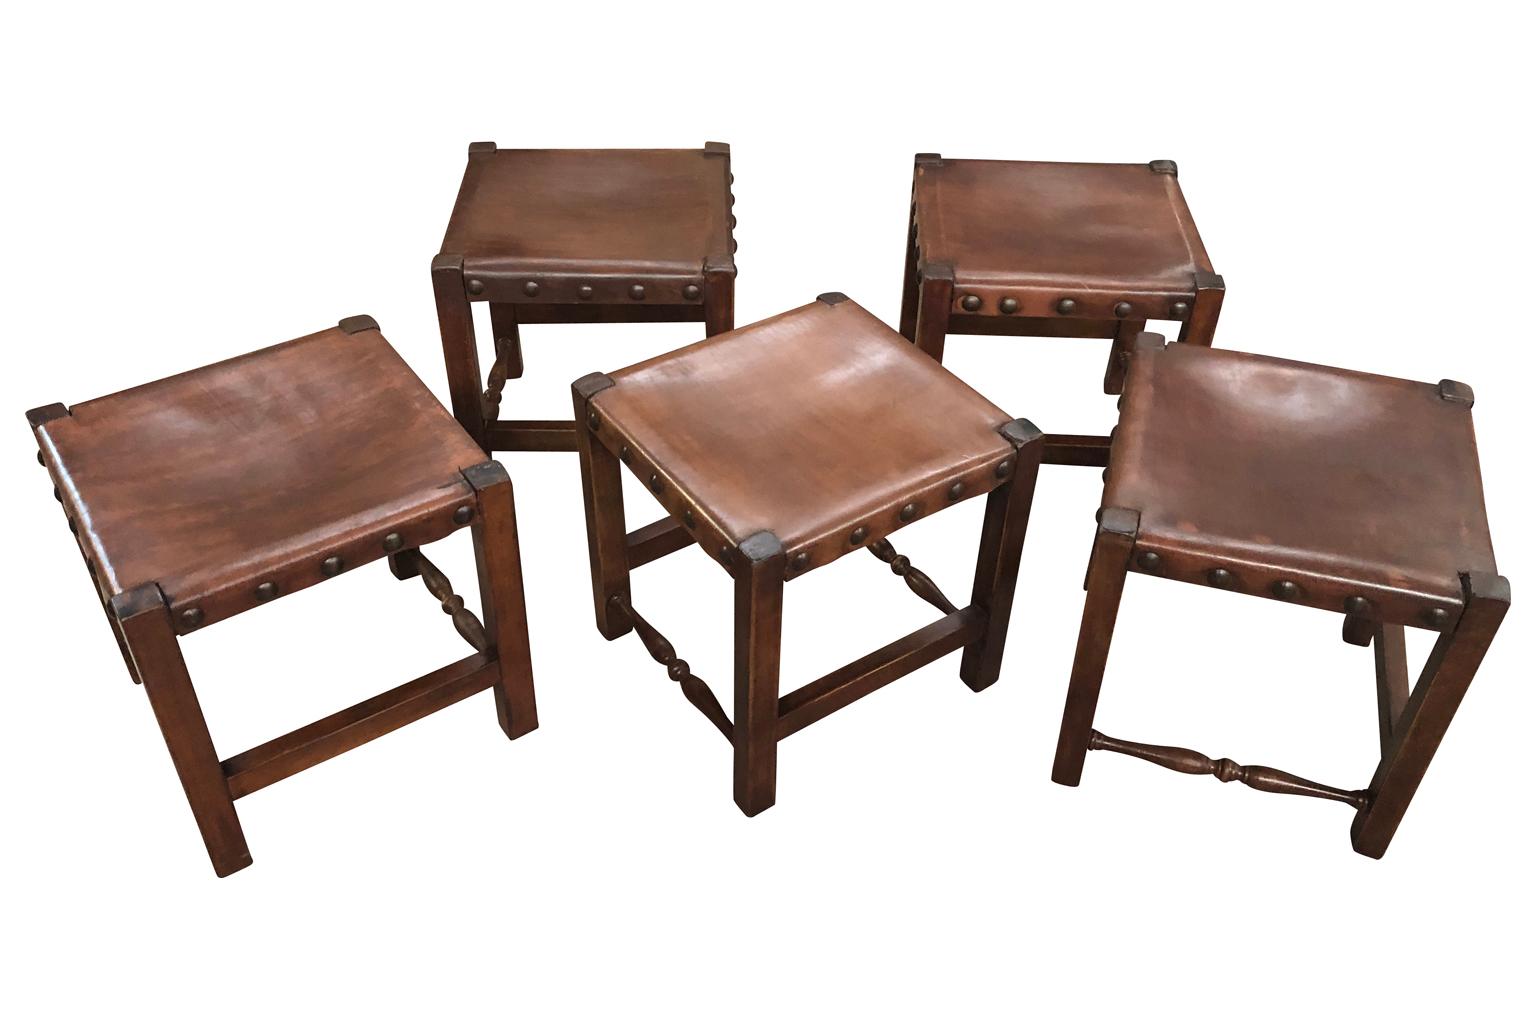 A set of 5 early 20th century Spanish stools handsomely constructed from beech and leather. Great accent pieces.